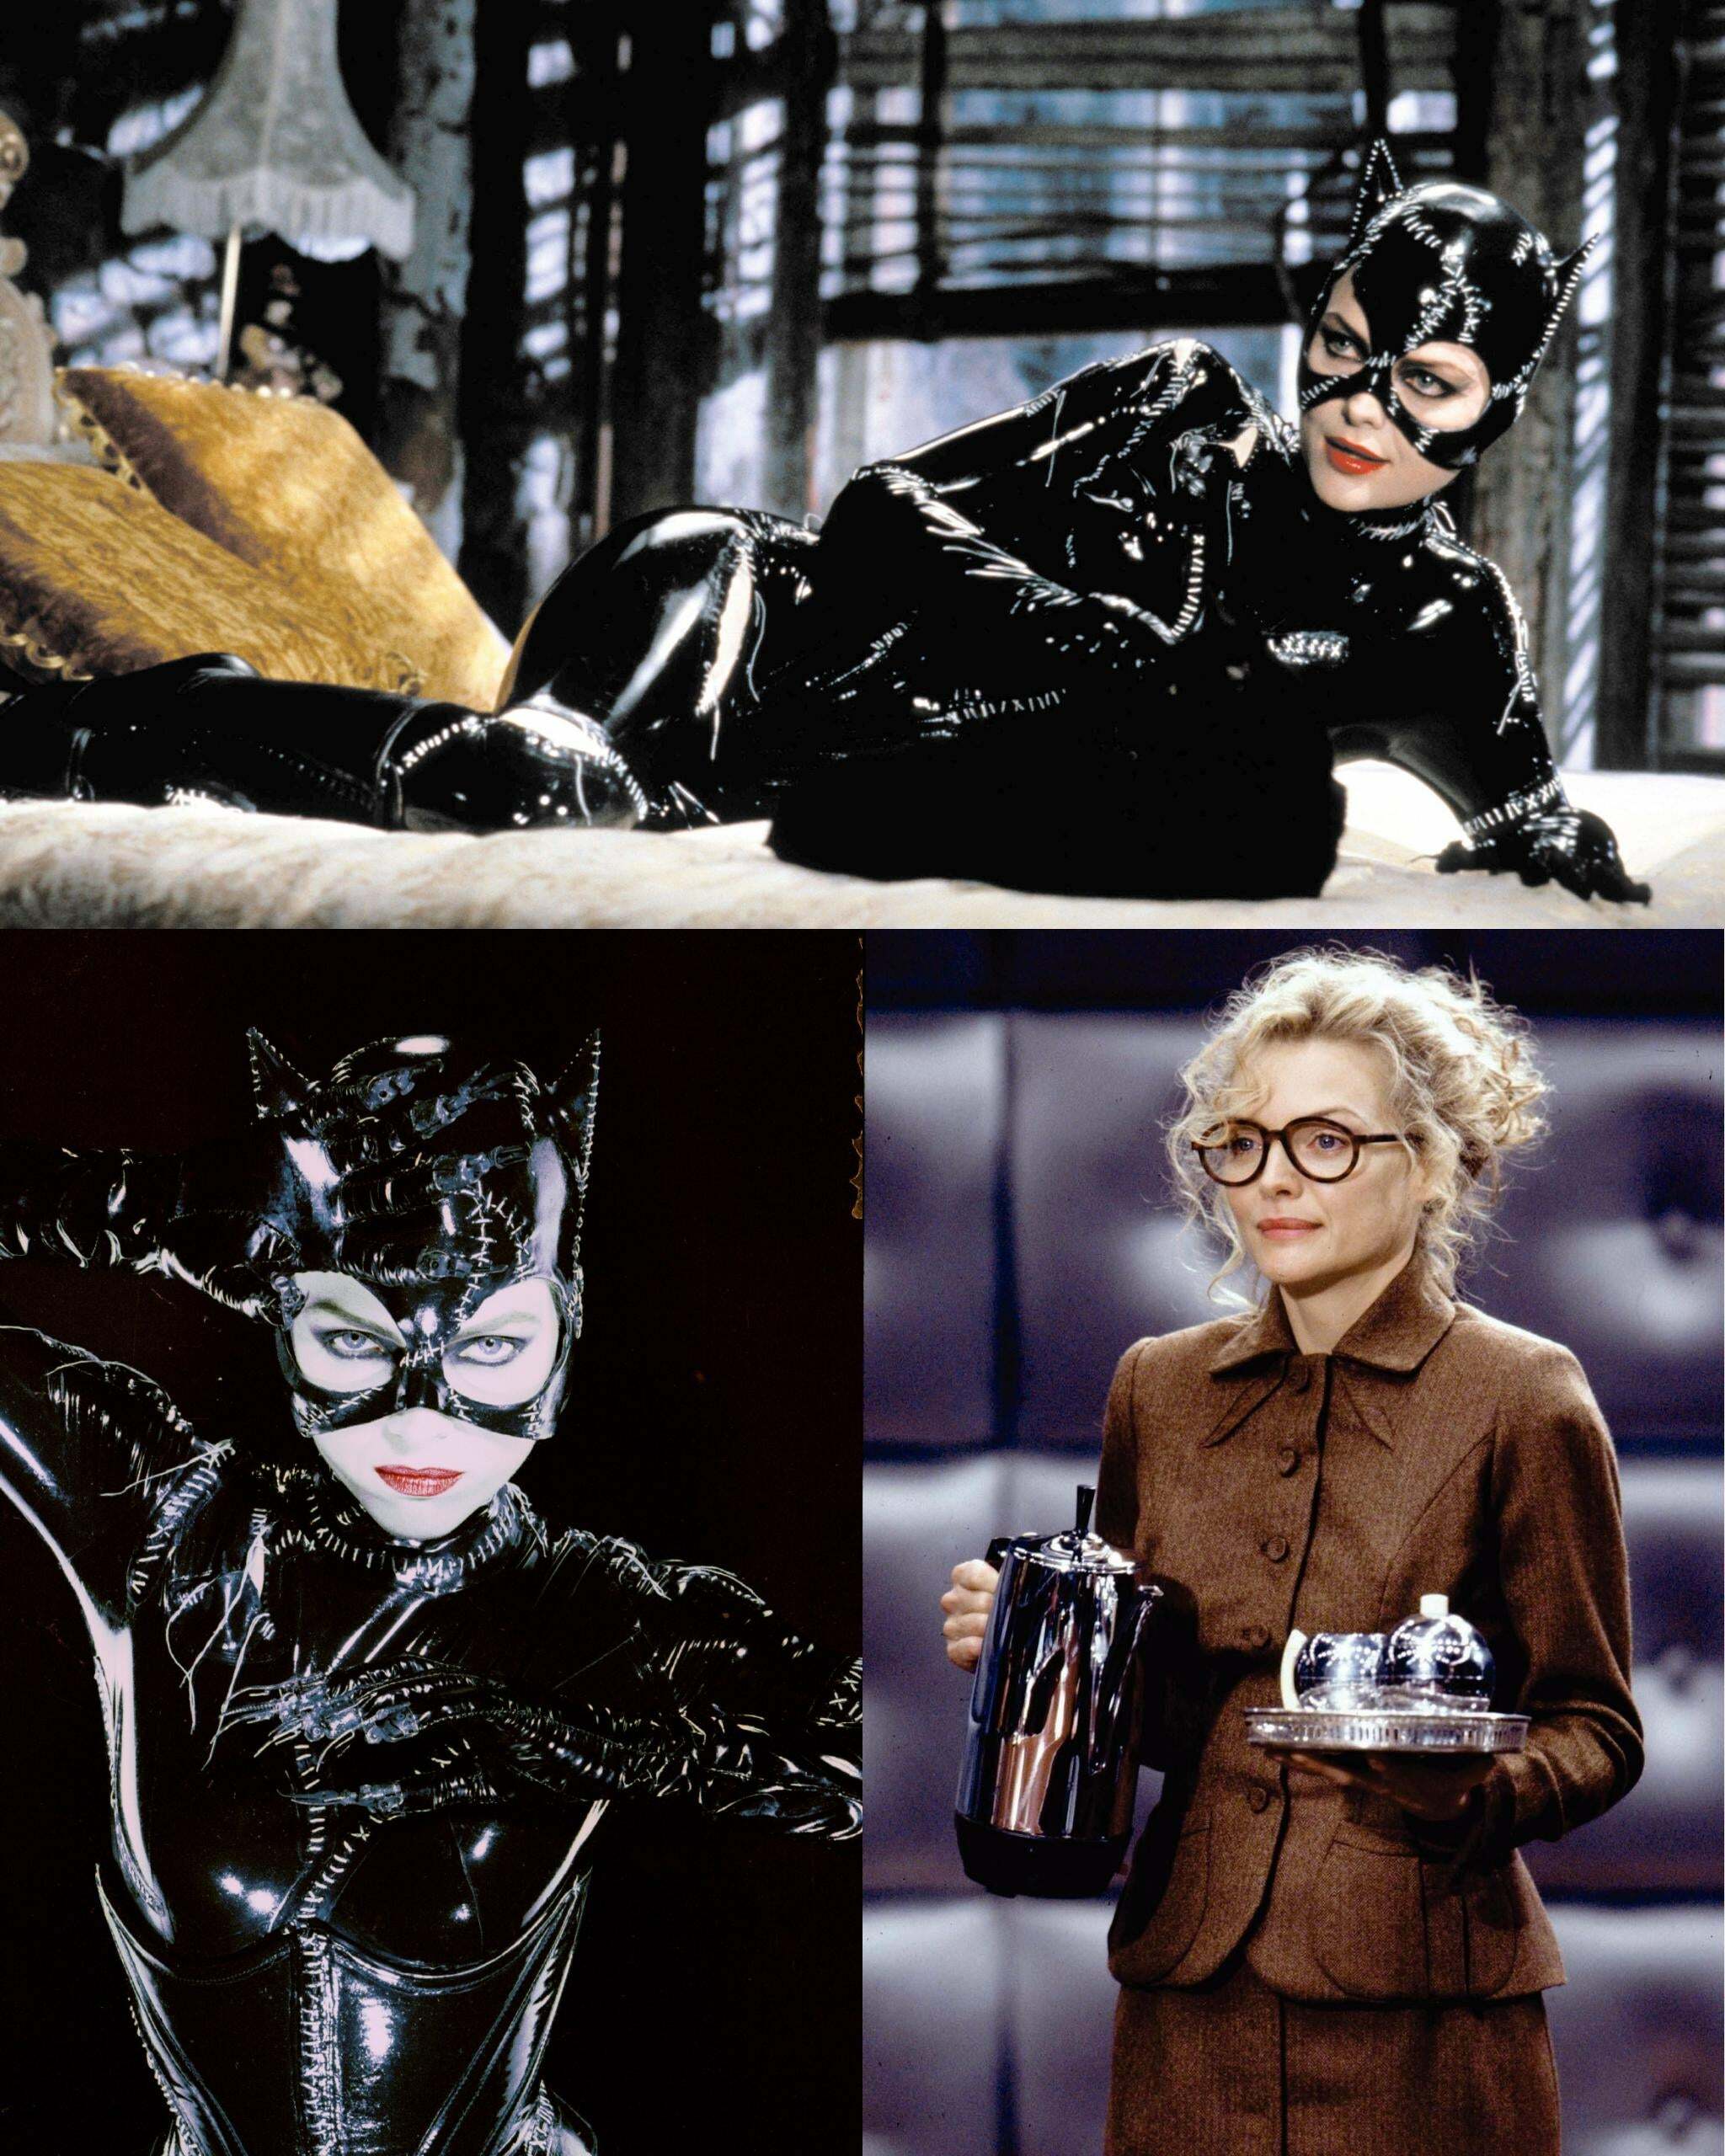 Michelle Pfeiffer as Catwoman in Batman Returns is one of